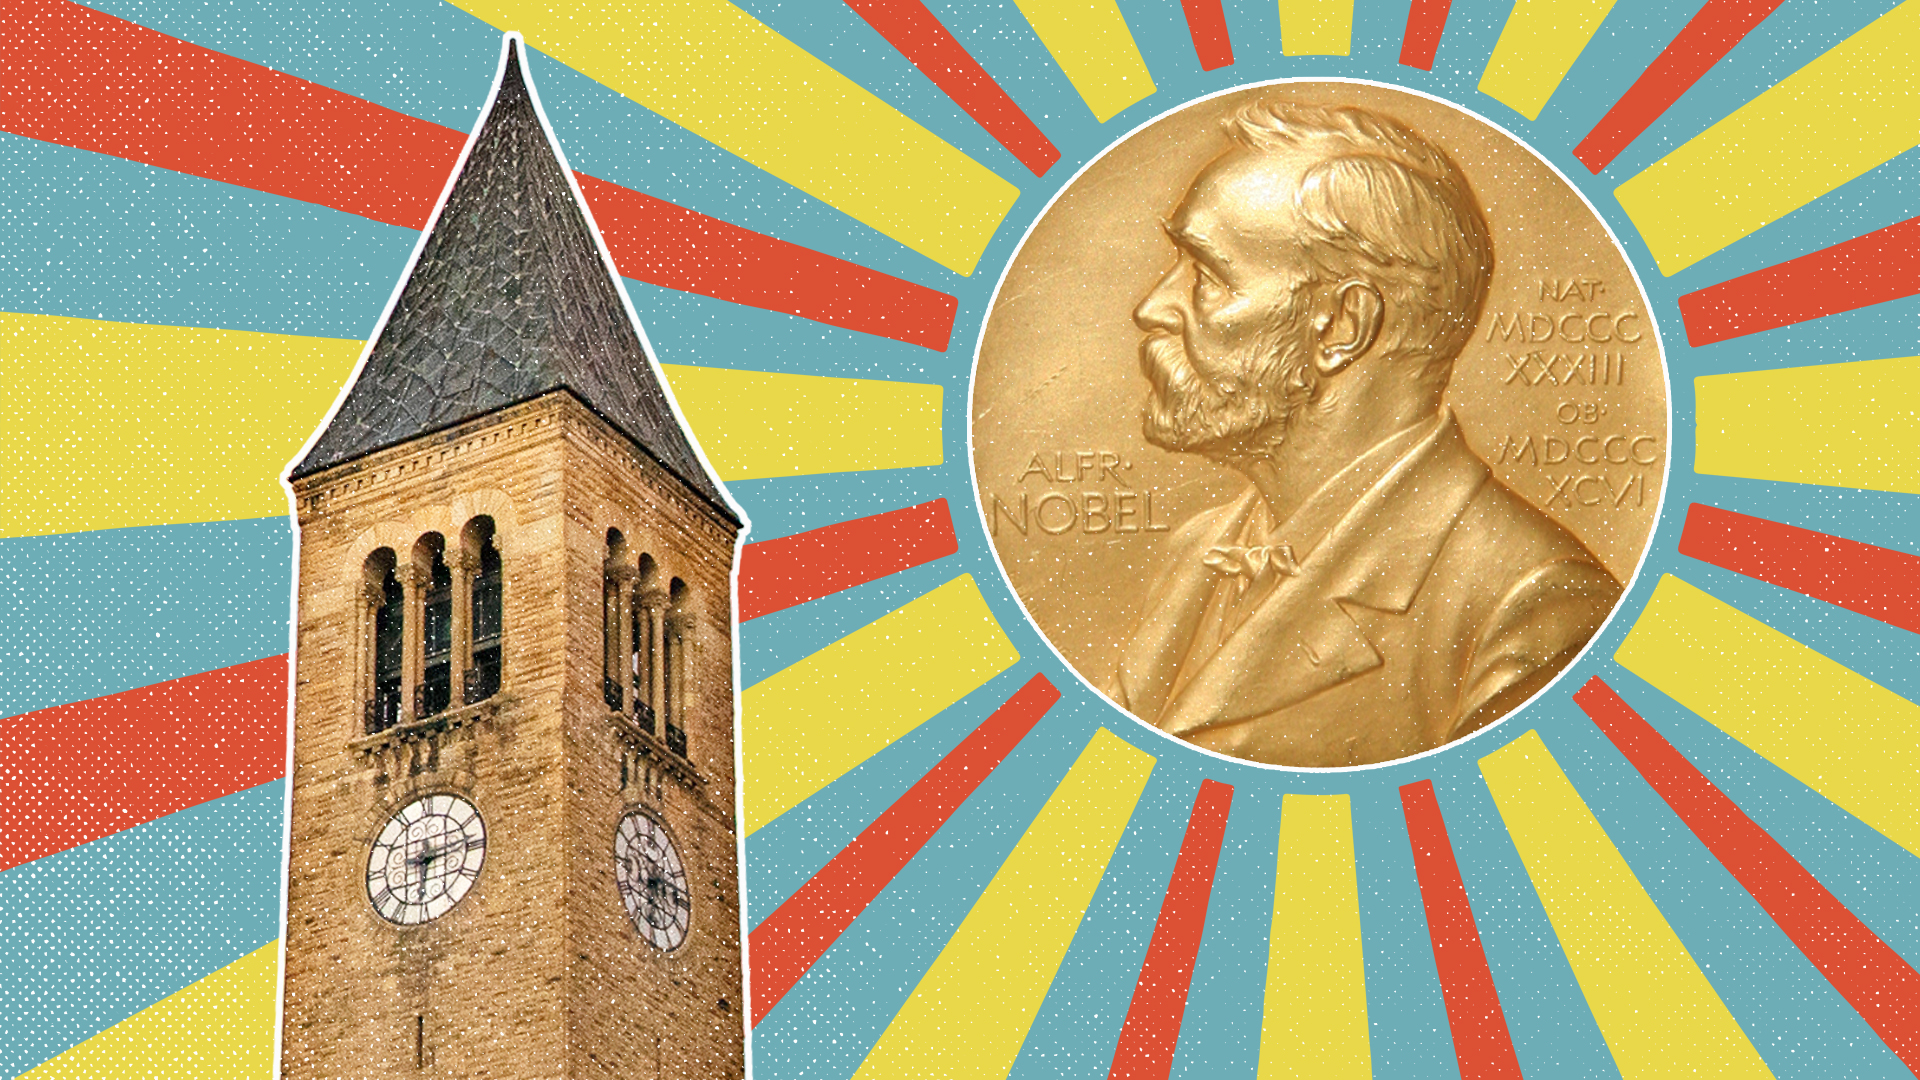 A graphic illustration of McGraw Tower at Cornell University and a Nobel Prize medal